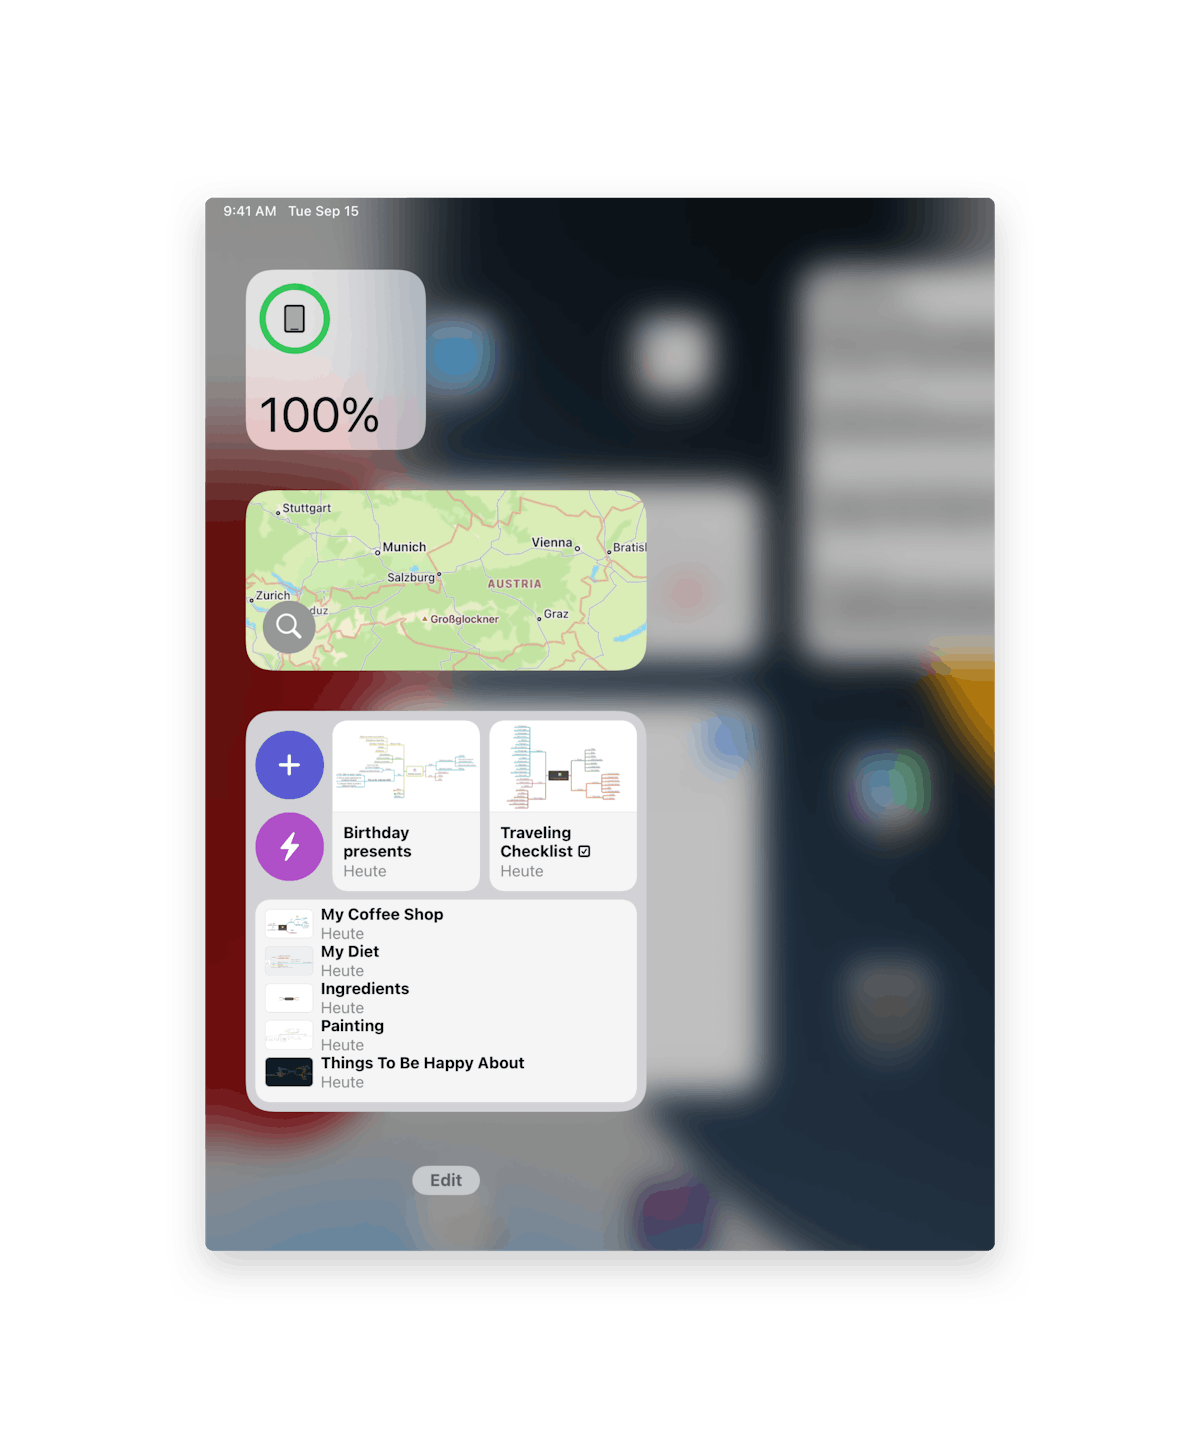 Access MindNode easily through the Widget on your Home Screen, Lock Screen, or Today View